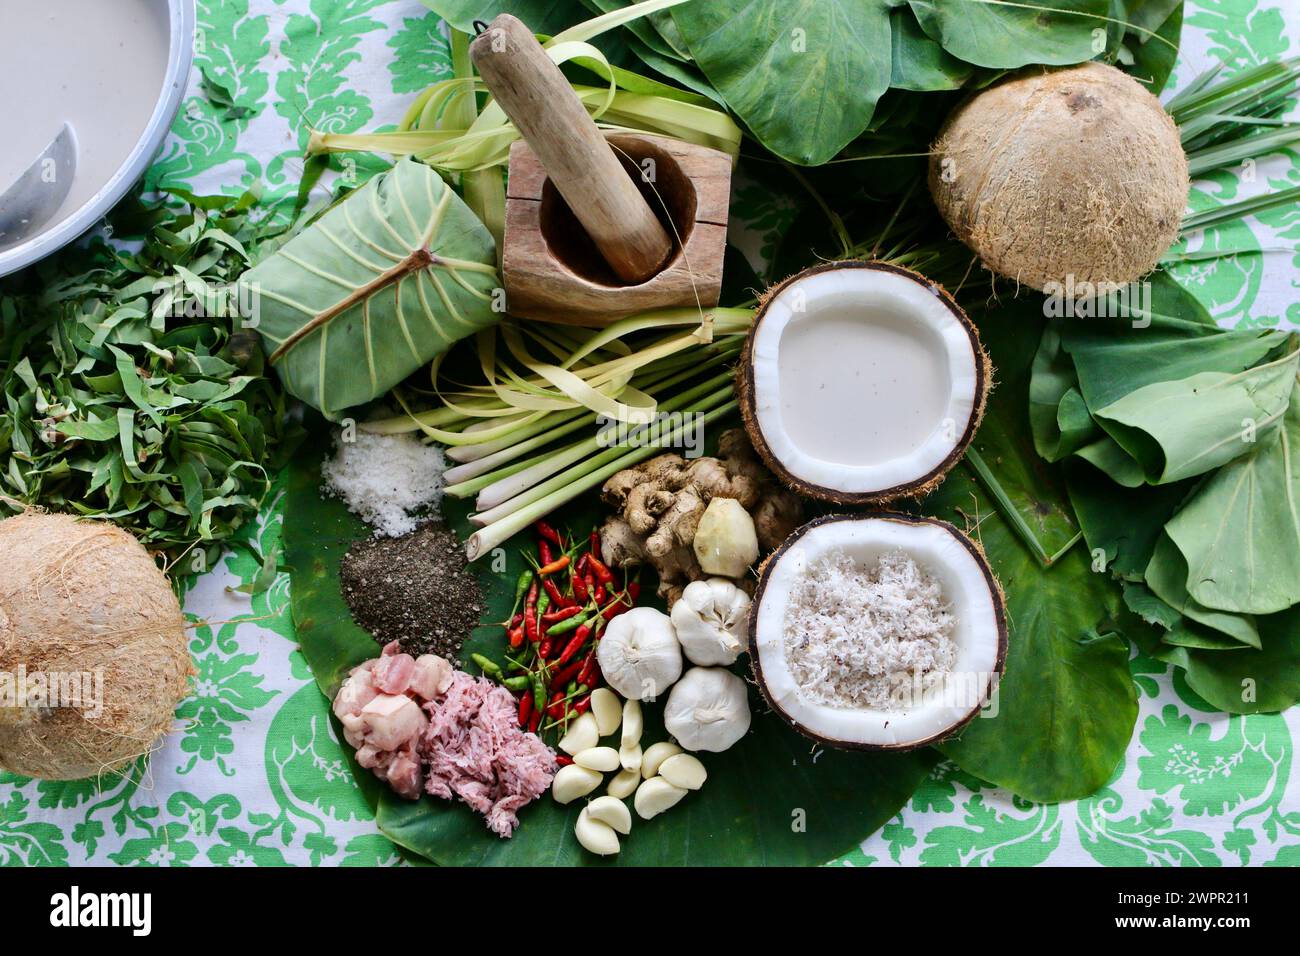 Pinangat. A heritage dish in Bicol Province, Philippines. Organic, healing spices are pounded and wrapped in taro leaves stewed in coconut milk. Stock Photo